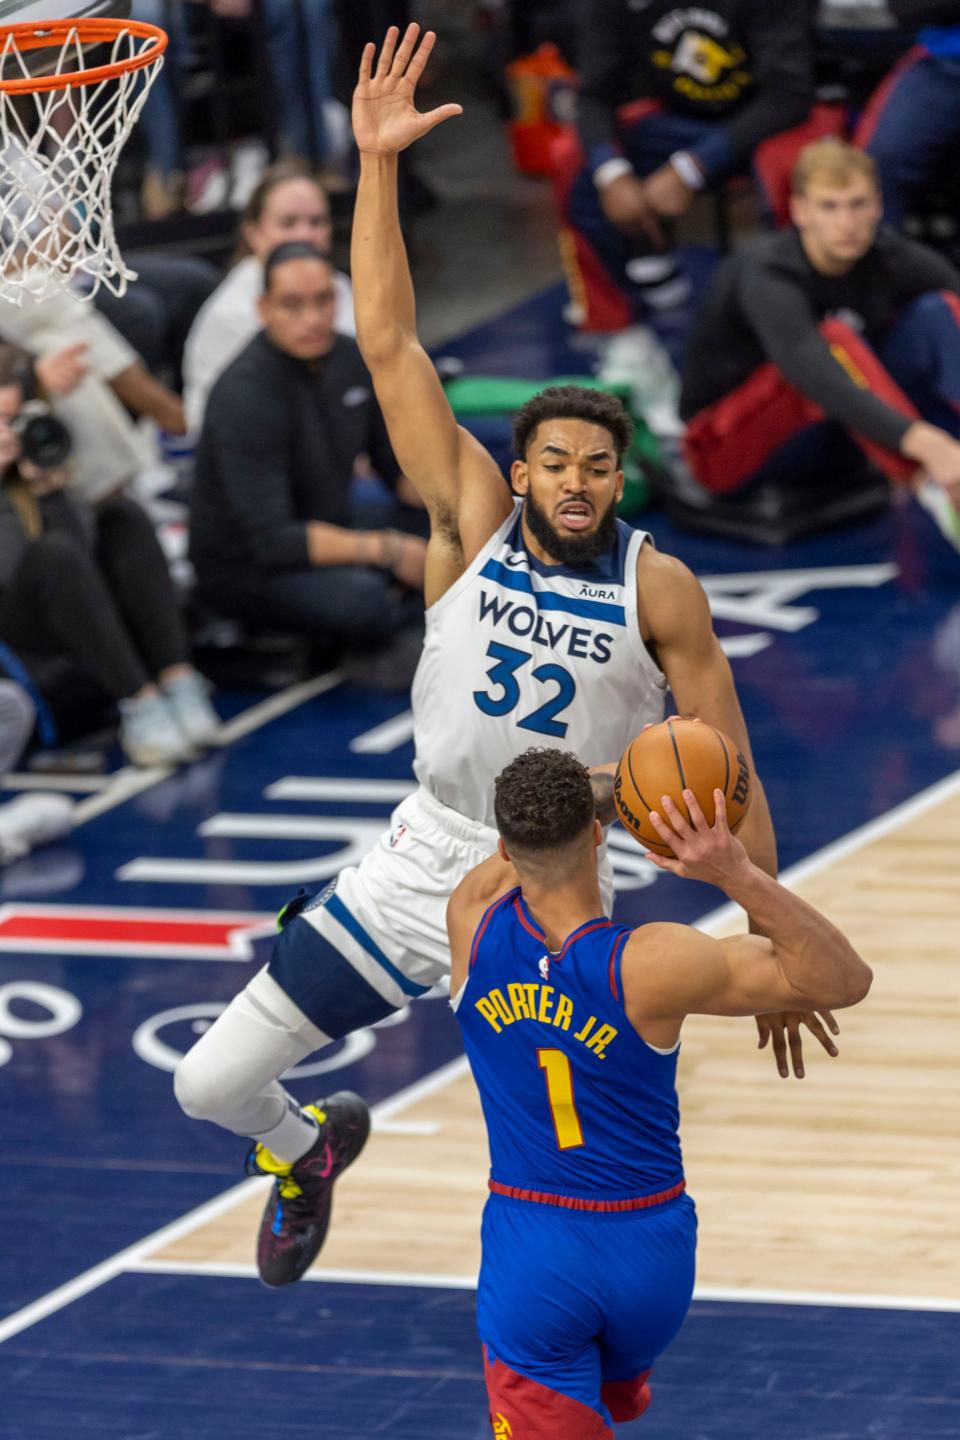 Will the Denver Nuggets beat the Minnesota Timberwolves in Game 4 of their NBA Playoffs series? NBA picks, predictions and odds weigh in on Sunday's game.